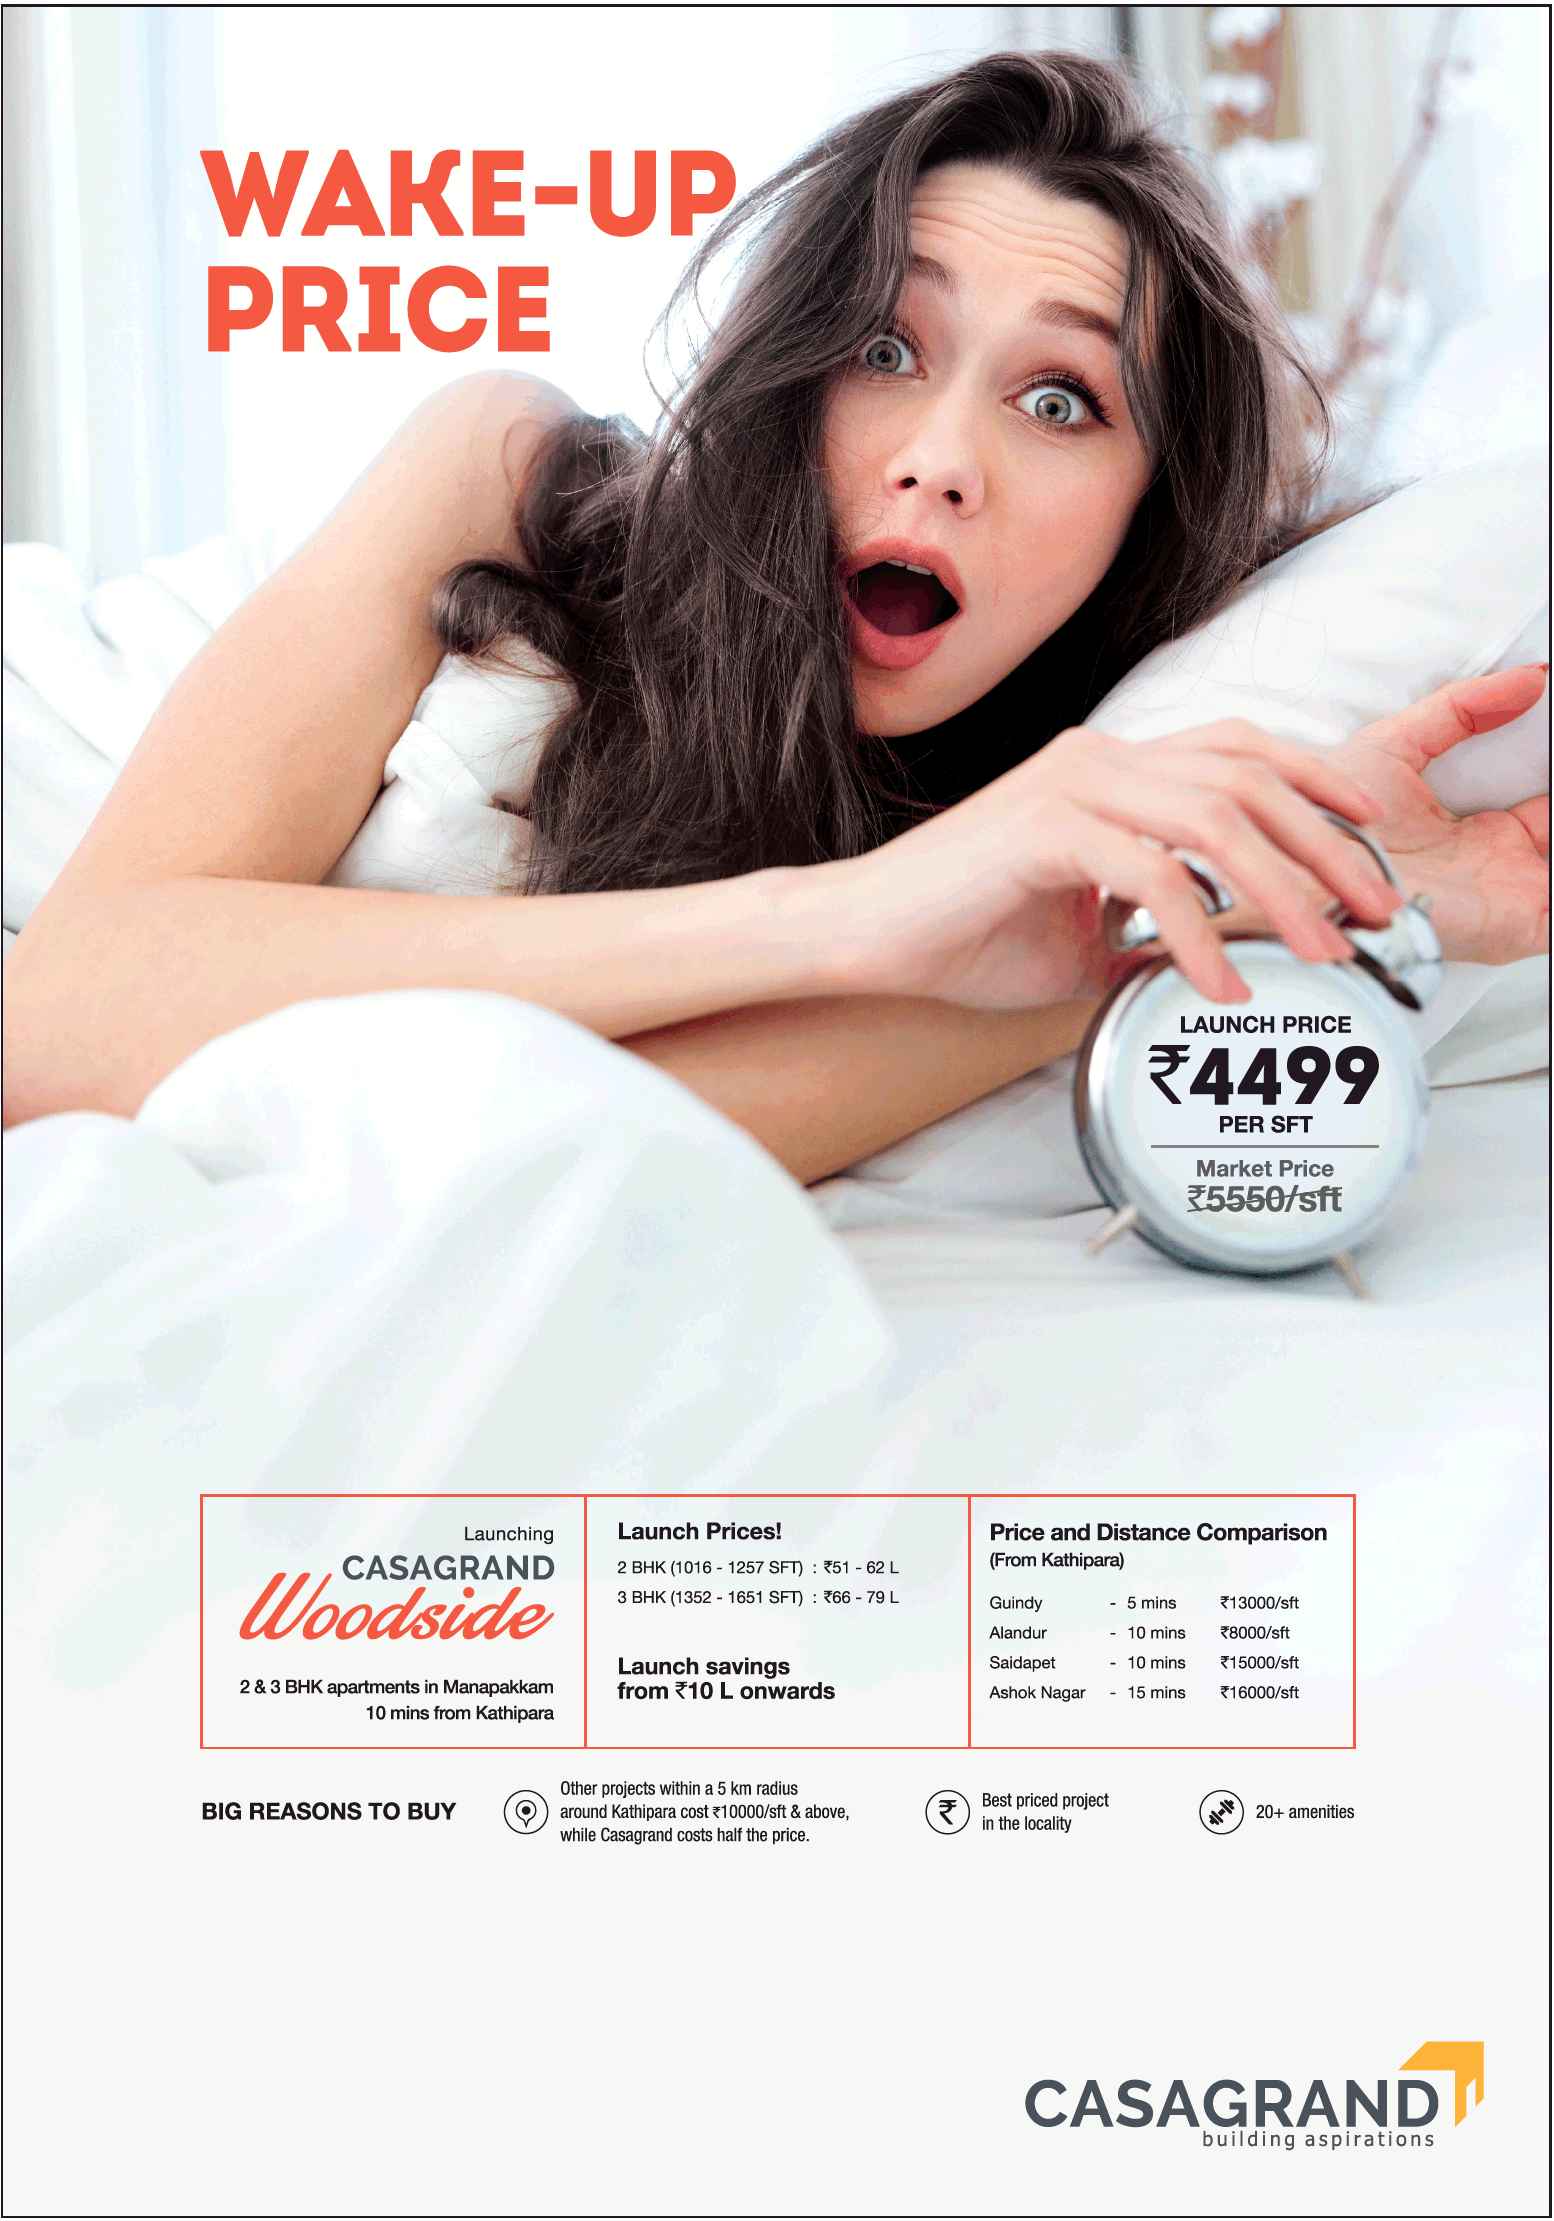 Get your home at Rs 4499 per sft at Casagrand Woodside, Chennai